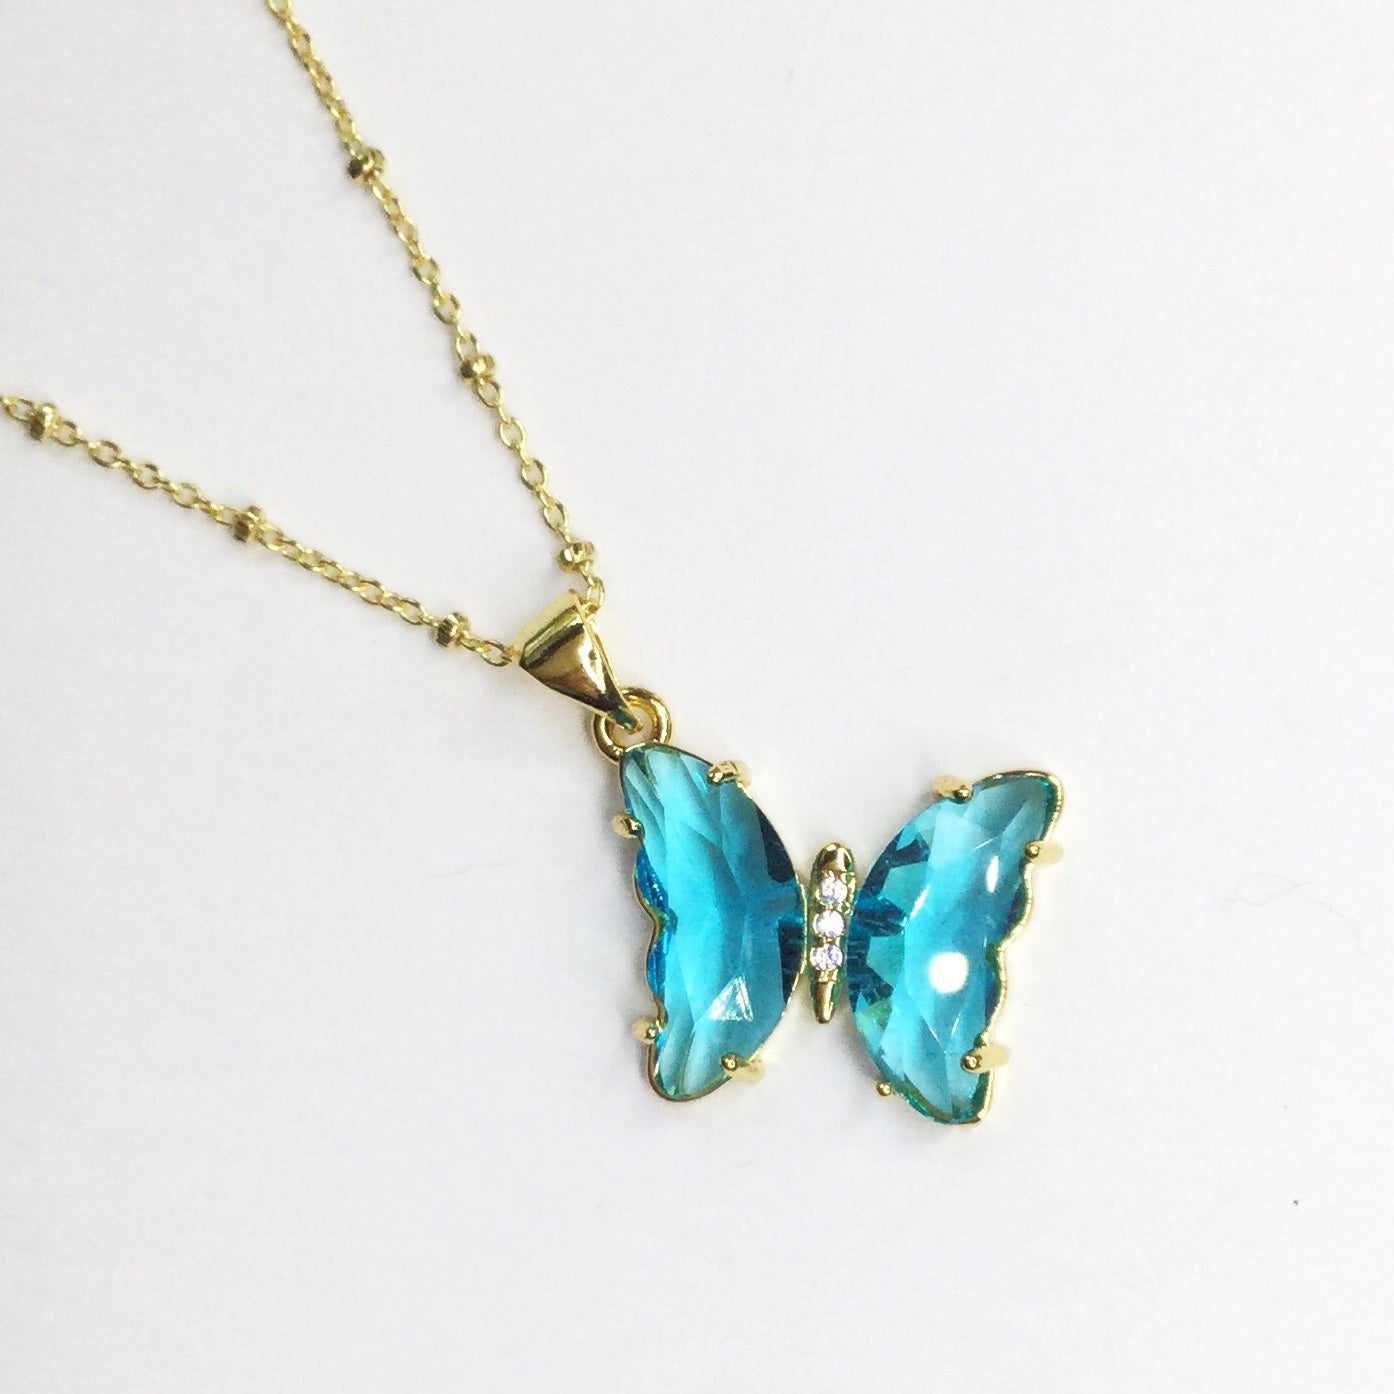 Aqua Glass Butterfly Necklace